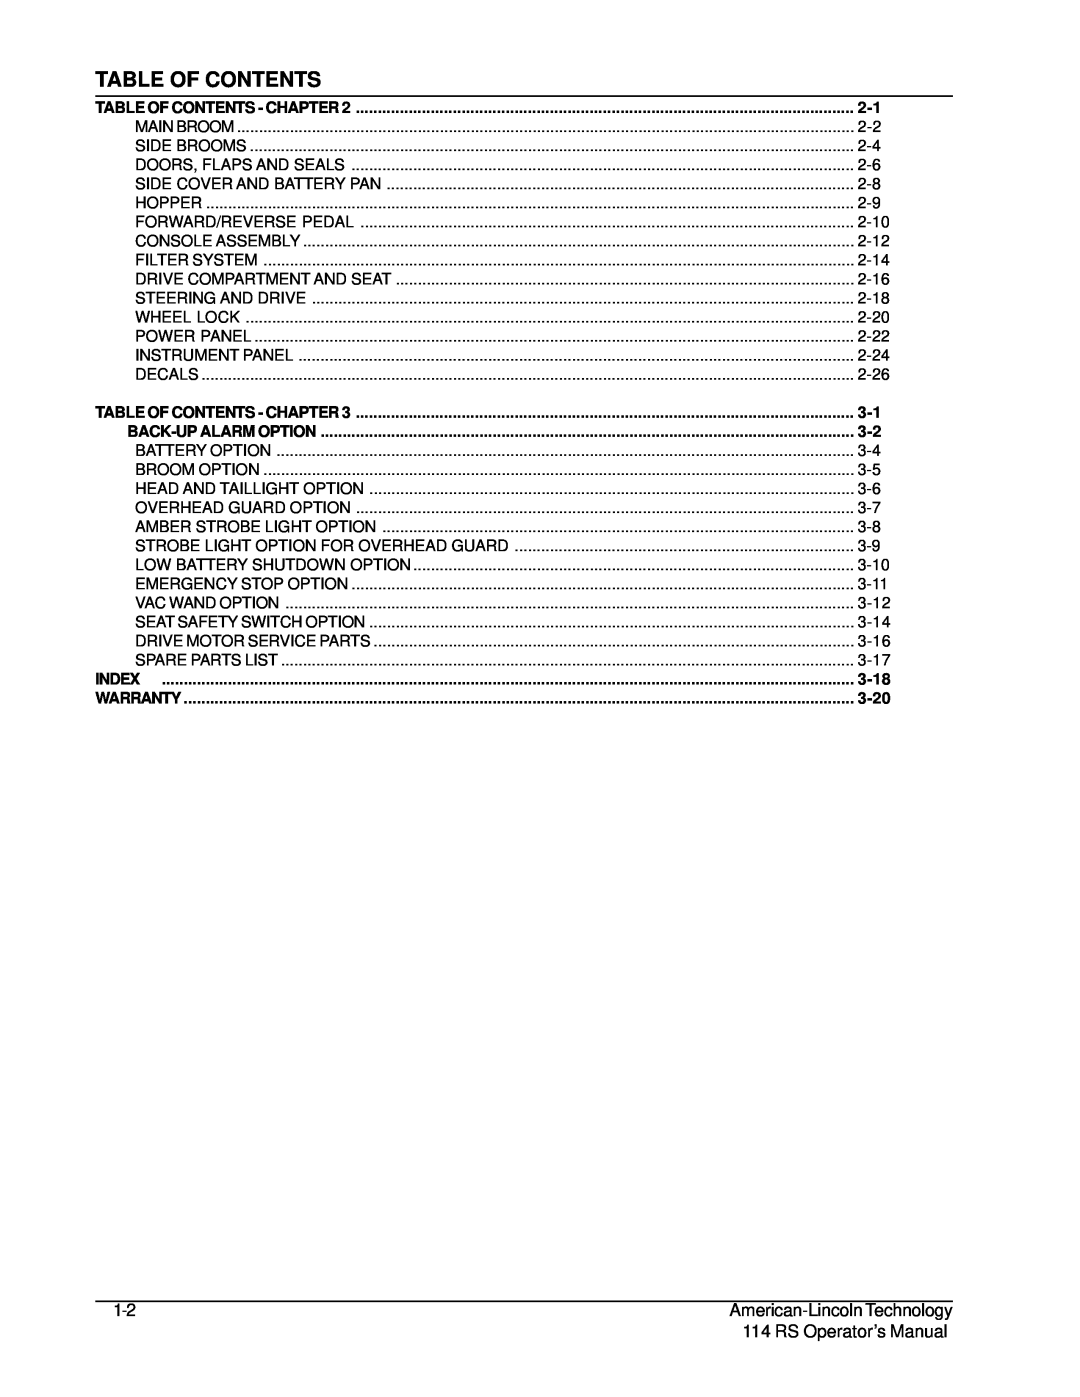 Nilfisk-ALTO 114RS SWEEPER manual Table Of Contents, RS Operator’s Manual 